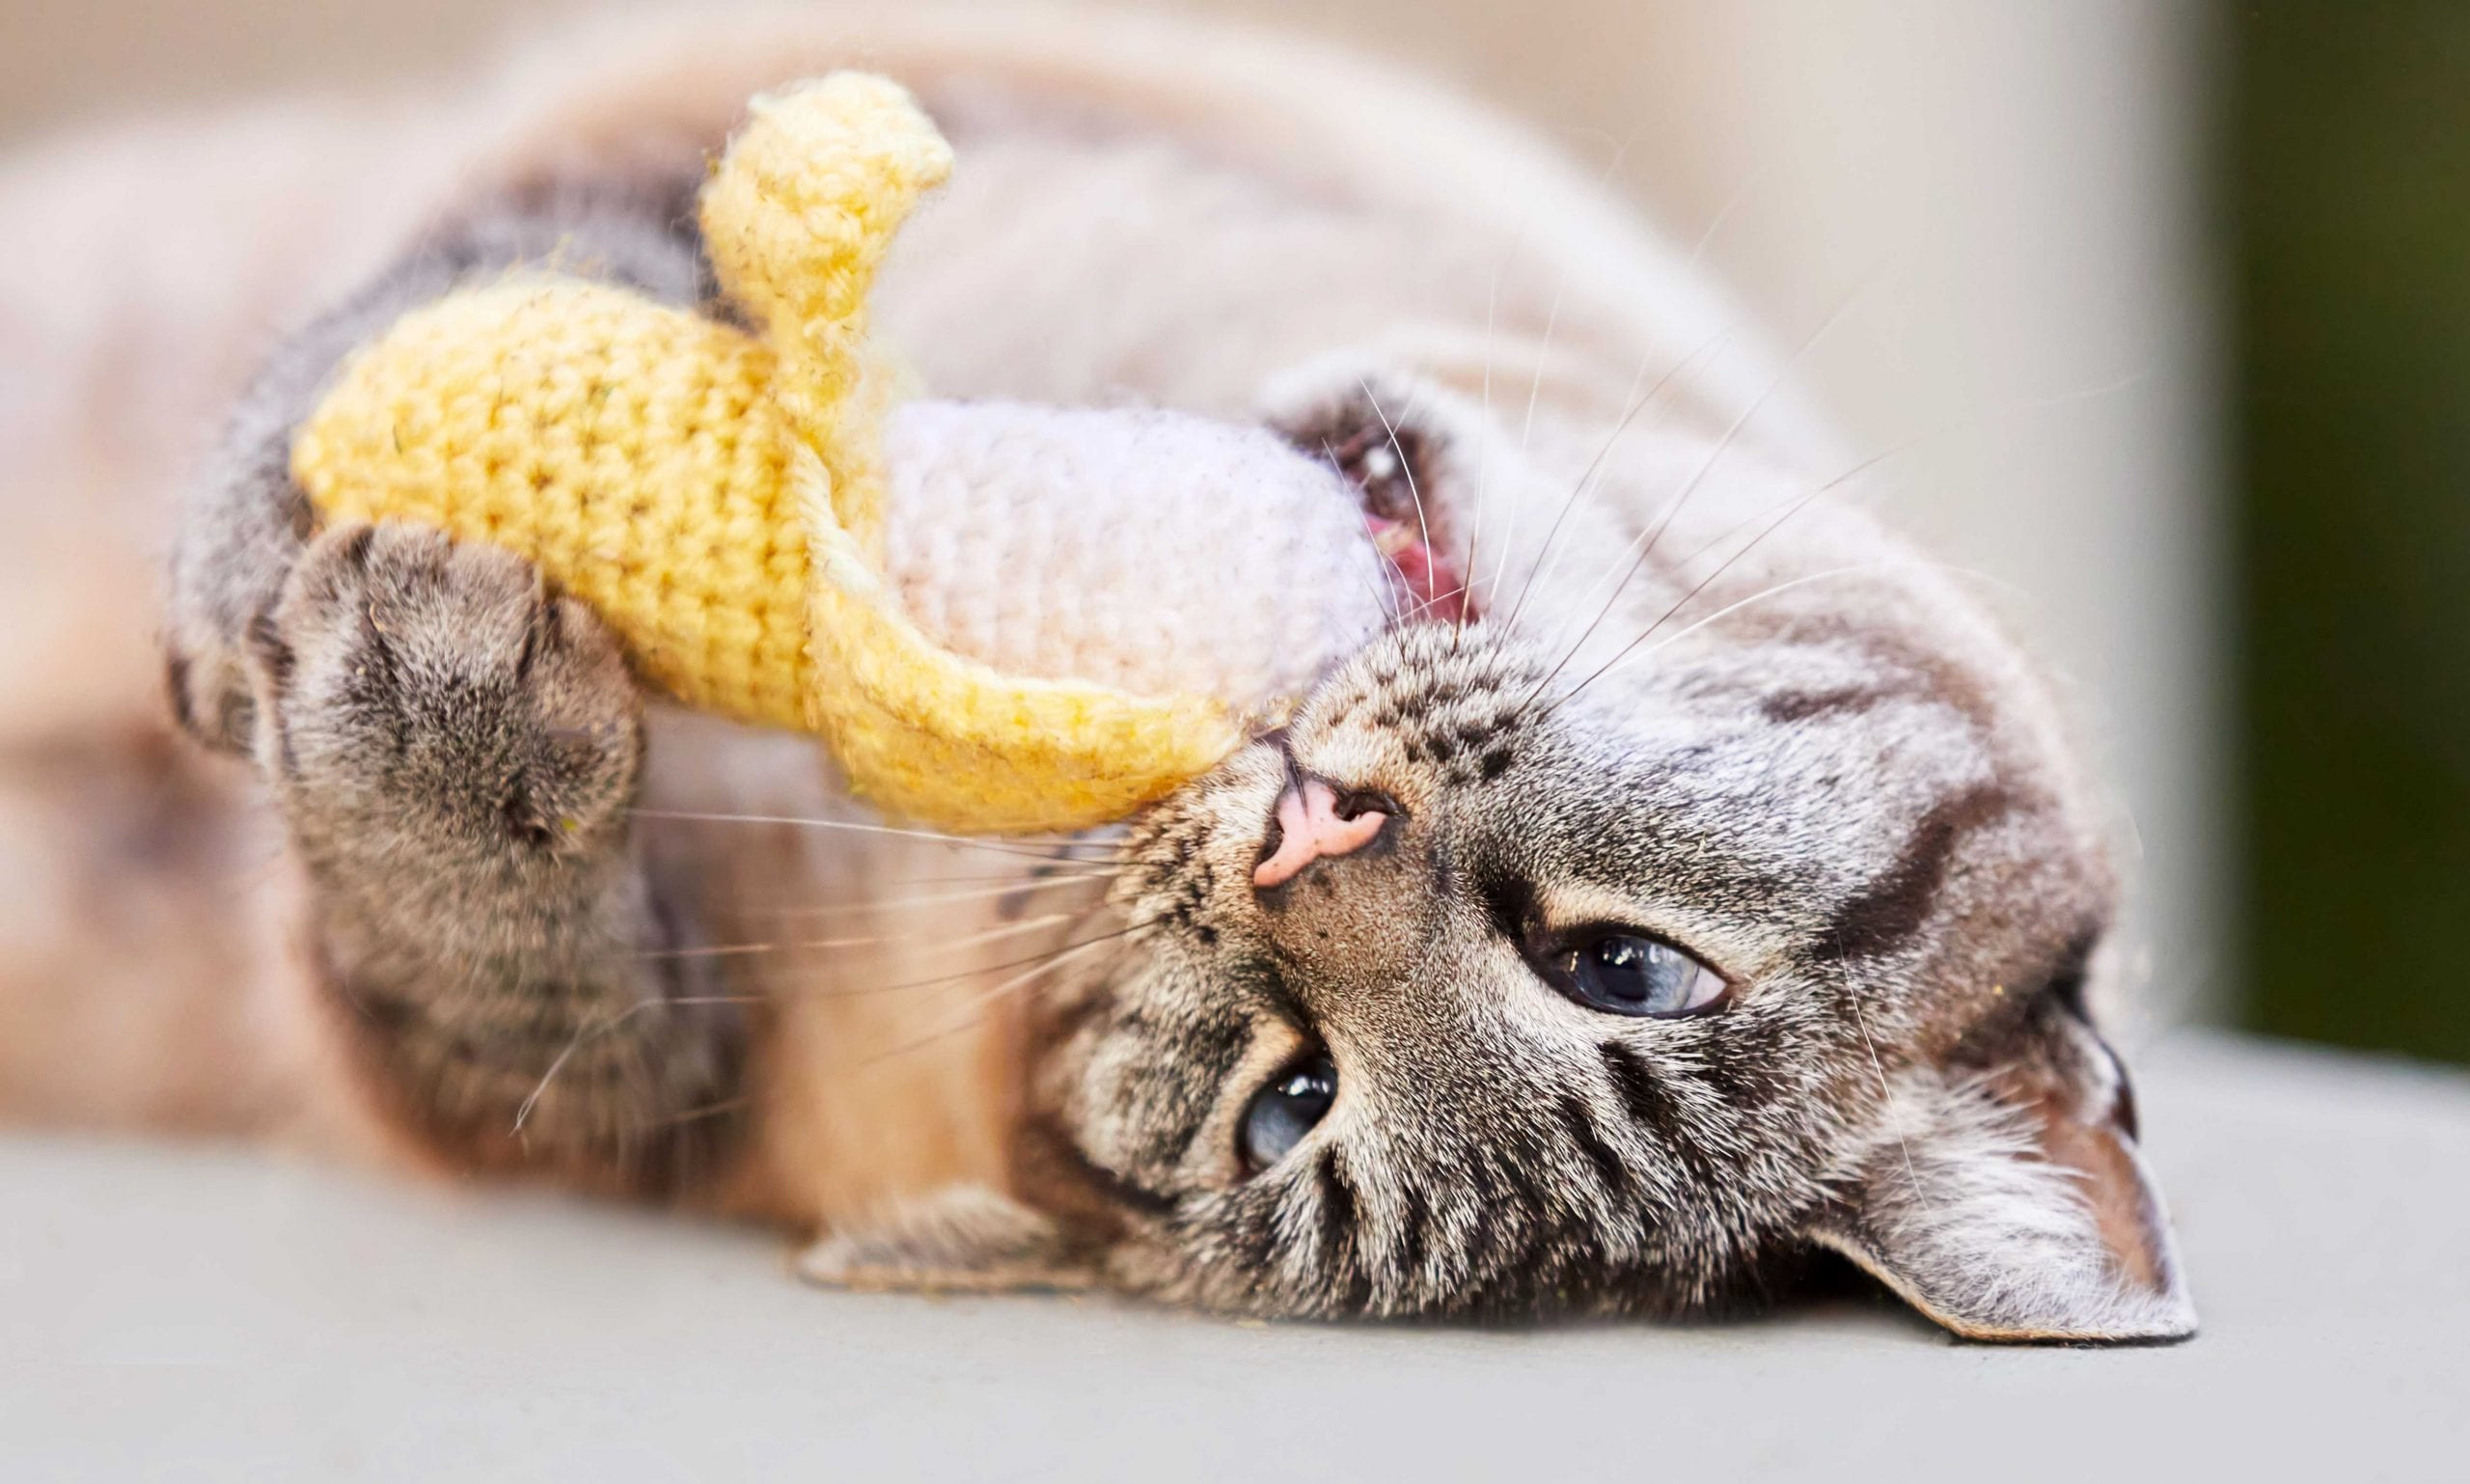 can cats eat catnip: cat chewing on banana catnip toy